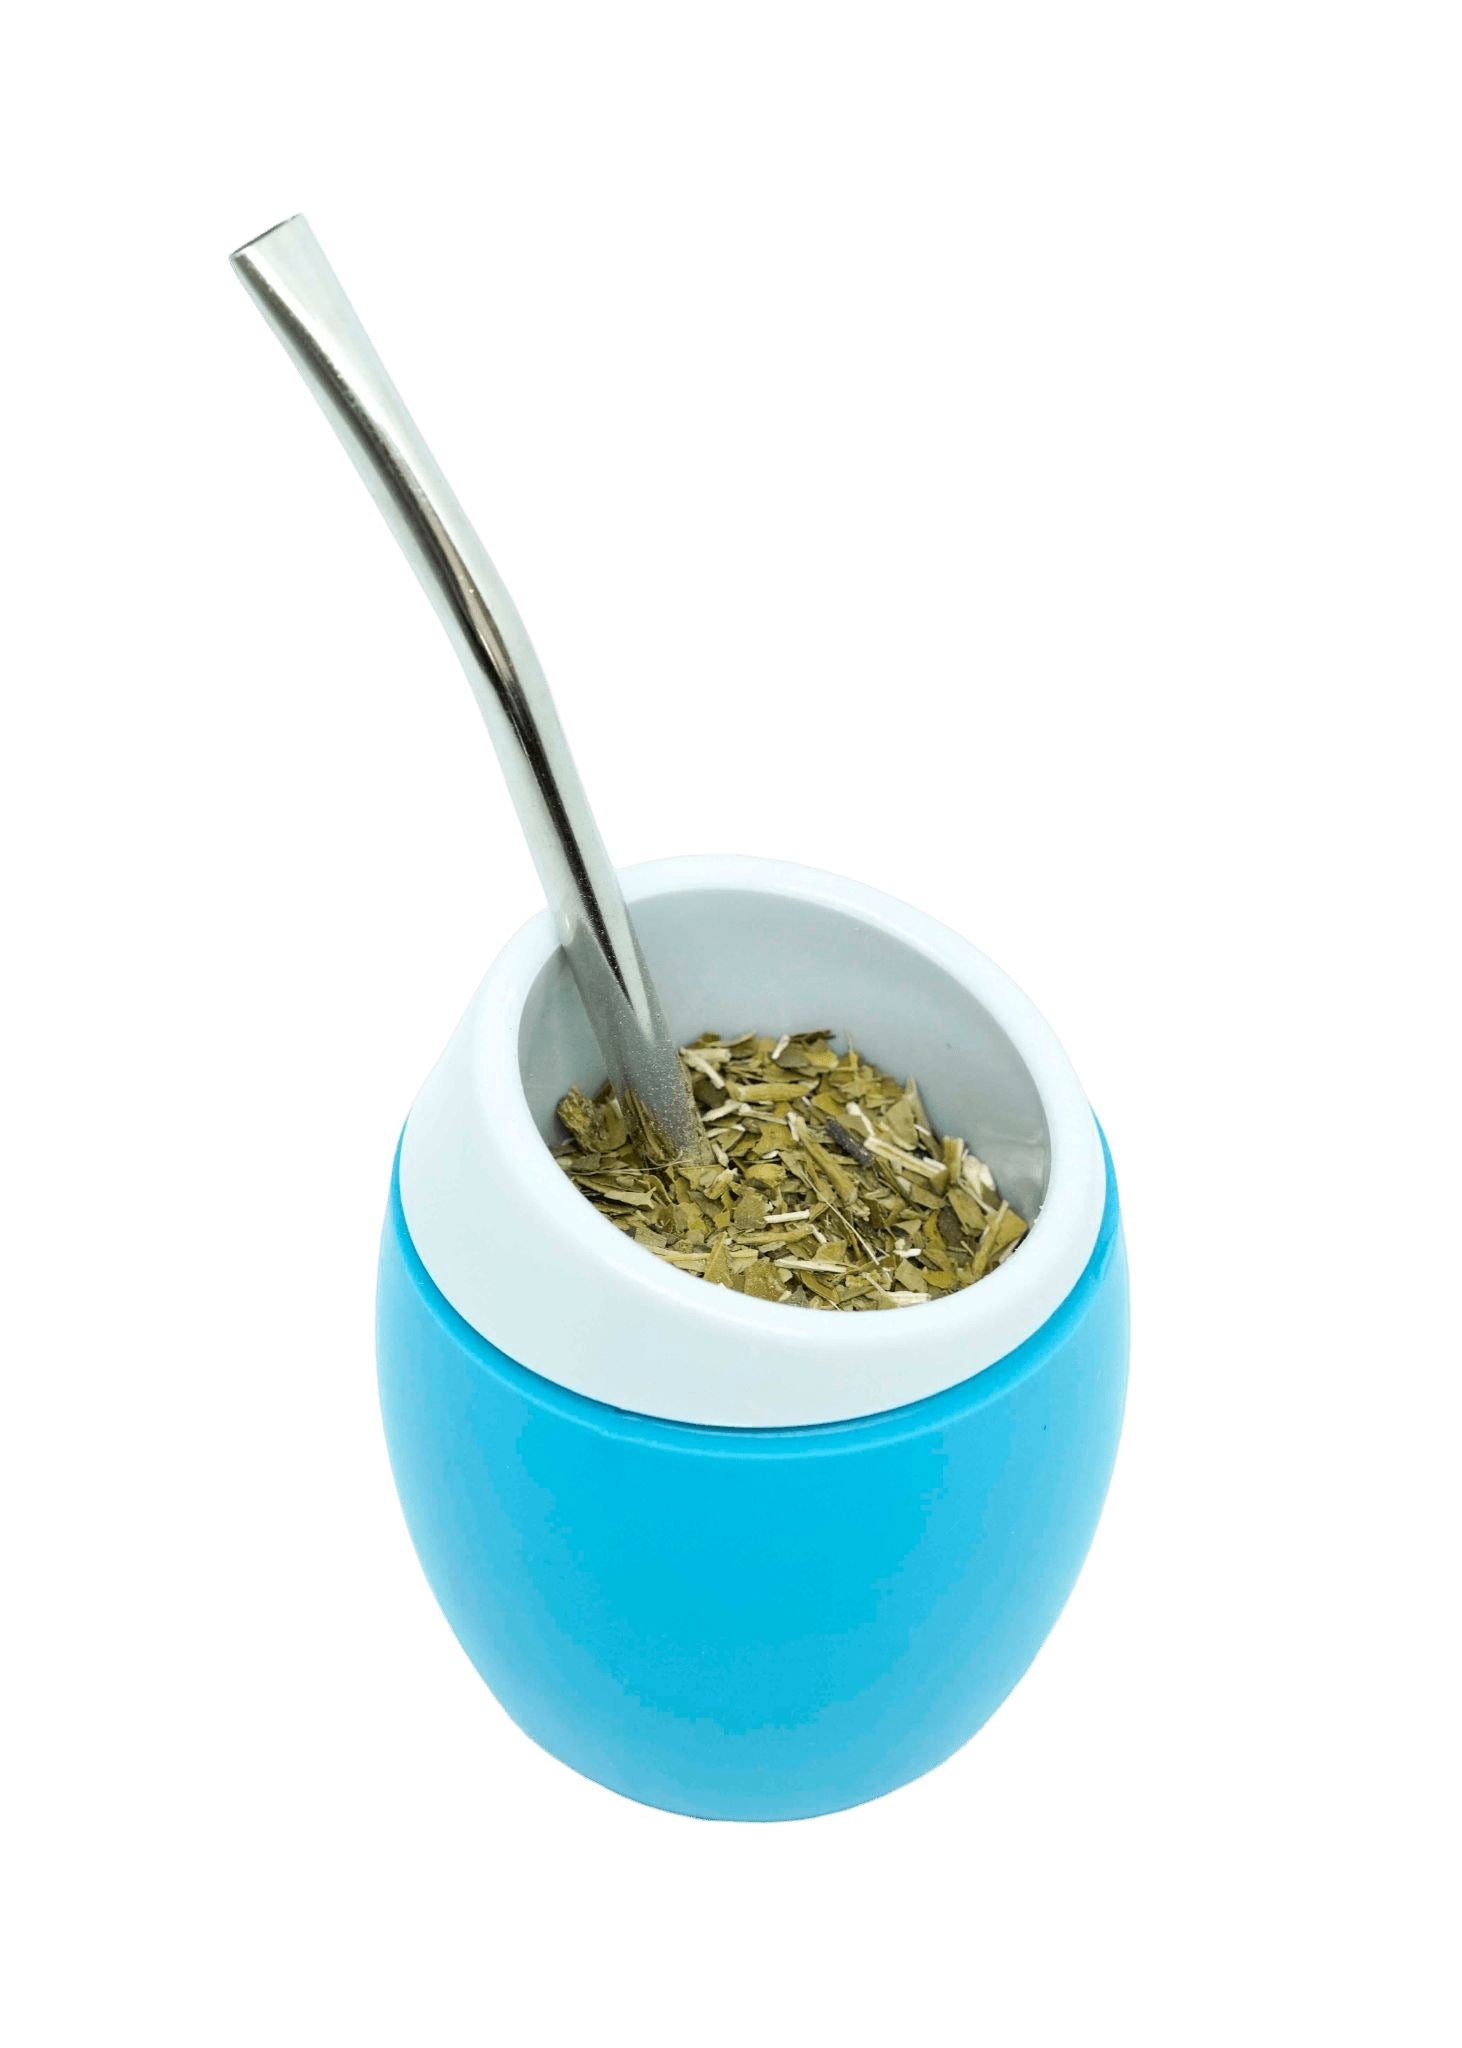 Nelo Mate Gourd with Self-extracting Straw - Turquoise (Mate and Bombilla) Mates Hispanic Pantry 